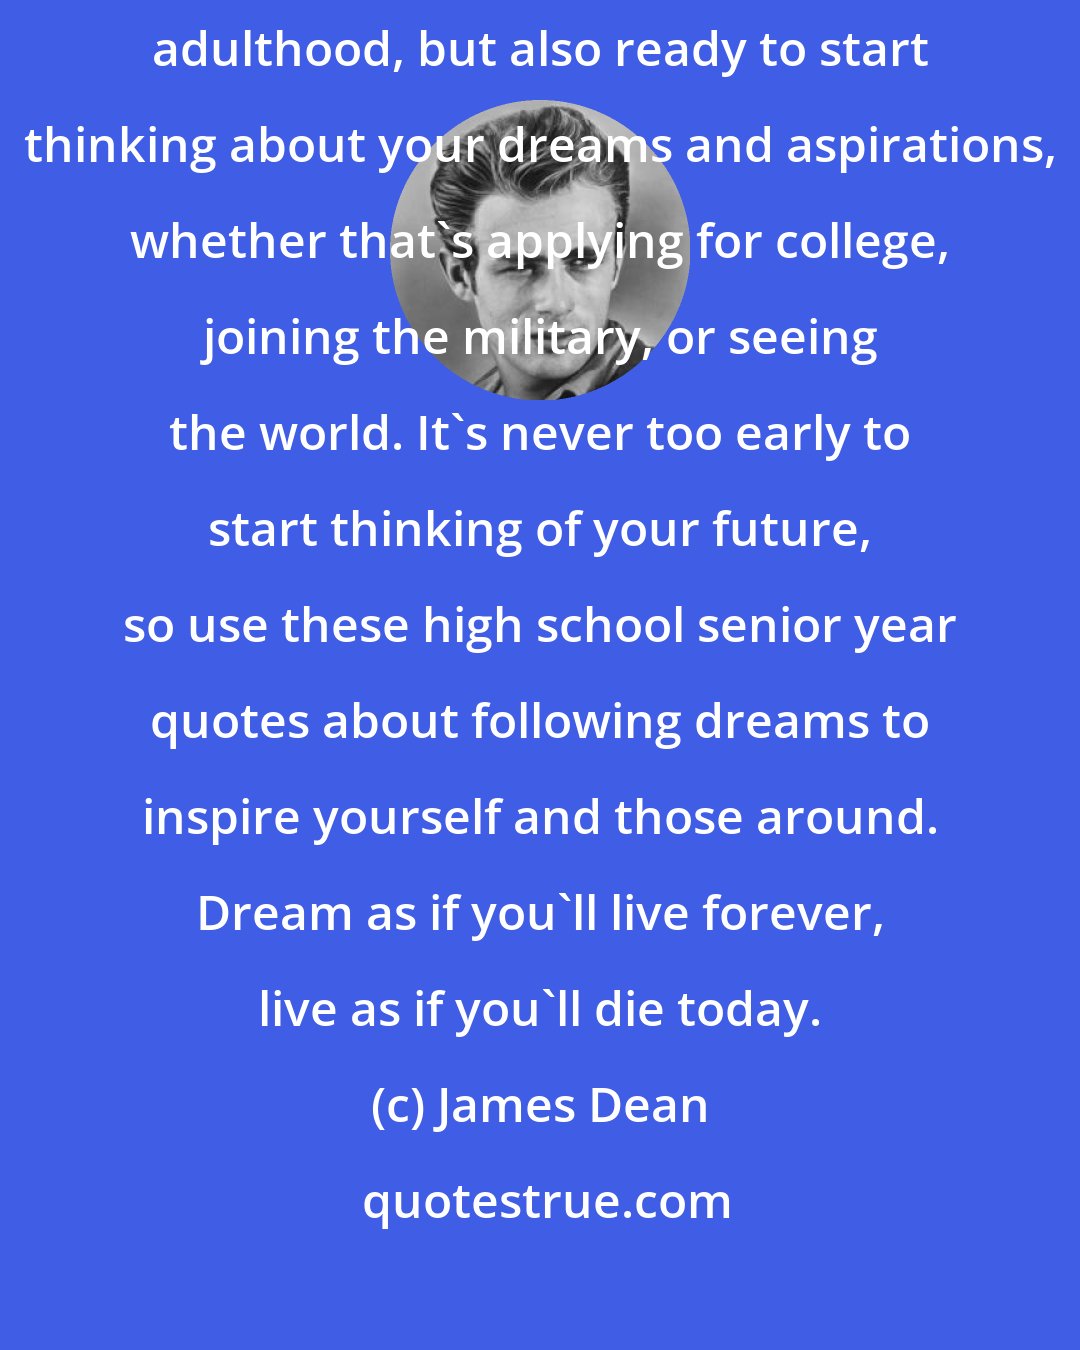 James Dean: Being a senior in high school means you're not only getting closer to adulthood, but also ready to start thinking about your dreams and aspirations, whether that's applying for college, joining the military, or seeing the world. It's never too early to start thinking of your future, so use these high school senior year quotes about following dreams to inspire yourself and those around. Dream as if you'll live forever, live as if you'll die today.